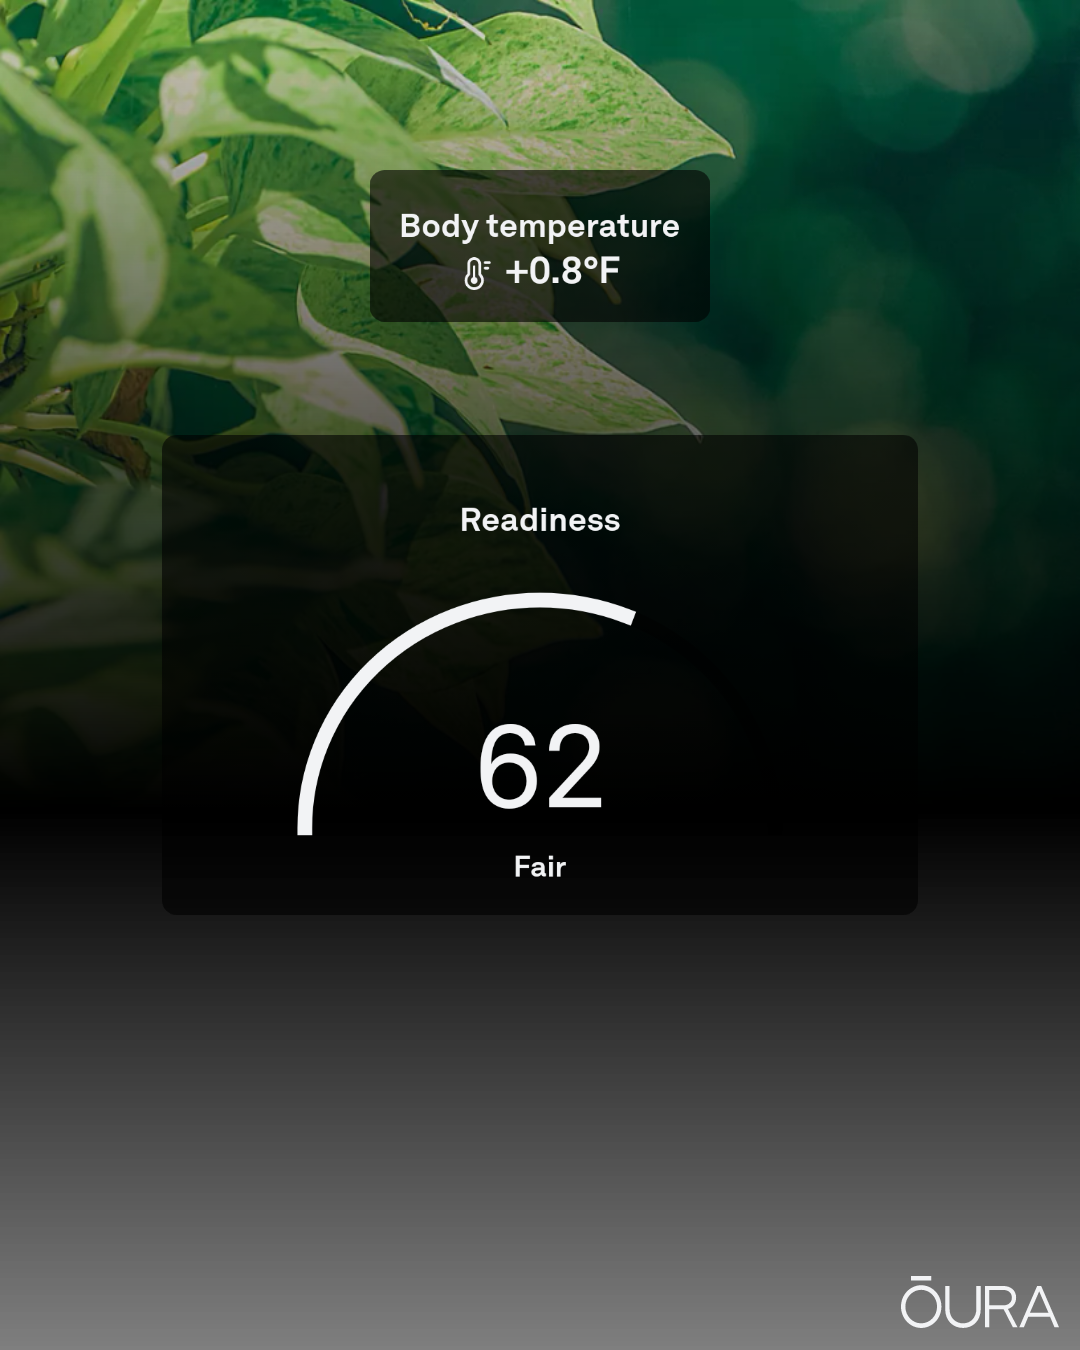 Share of Oura ring readiness score, showing my overnight body temperature elevated by 0.8℉ above baseline.